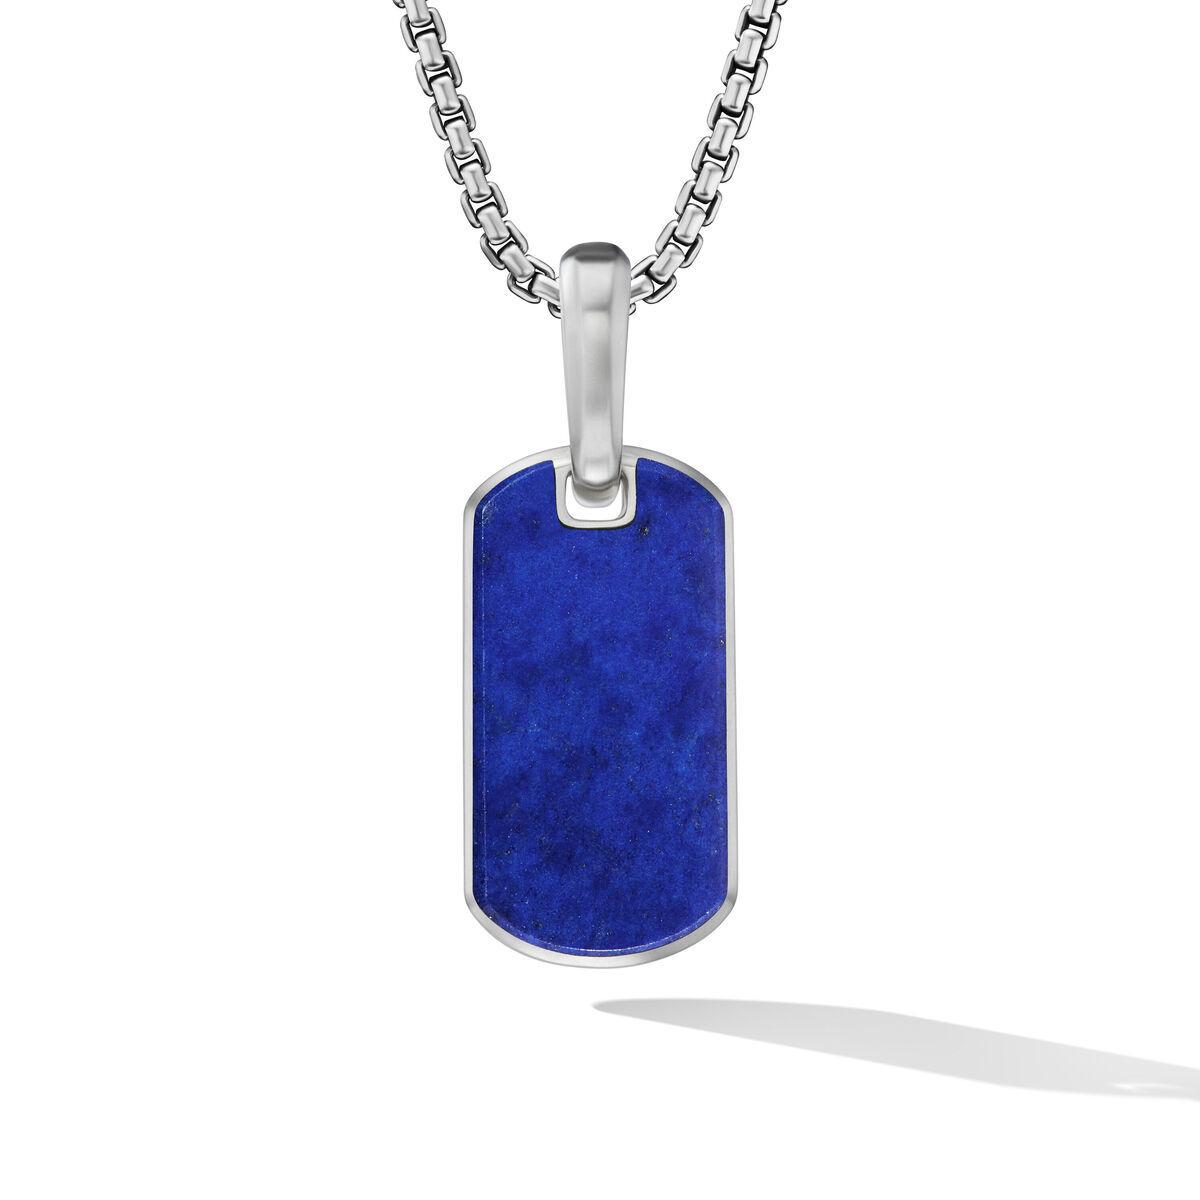 David Yurman Chevron Tag in Sterling Silver with Lapis